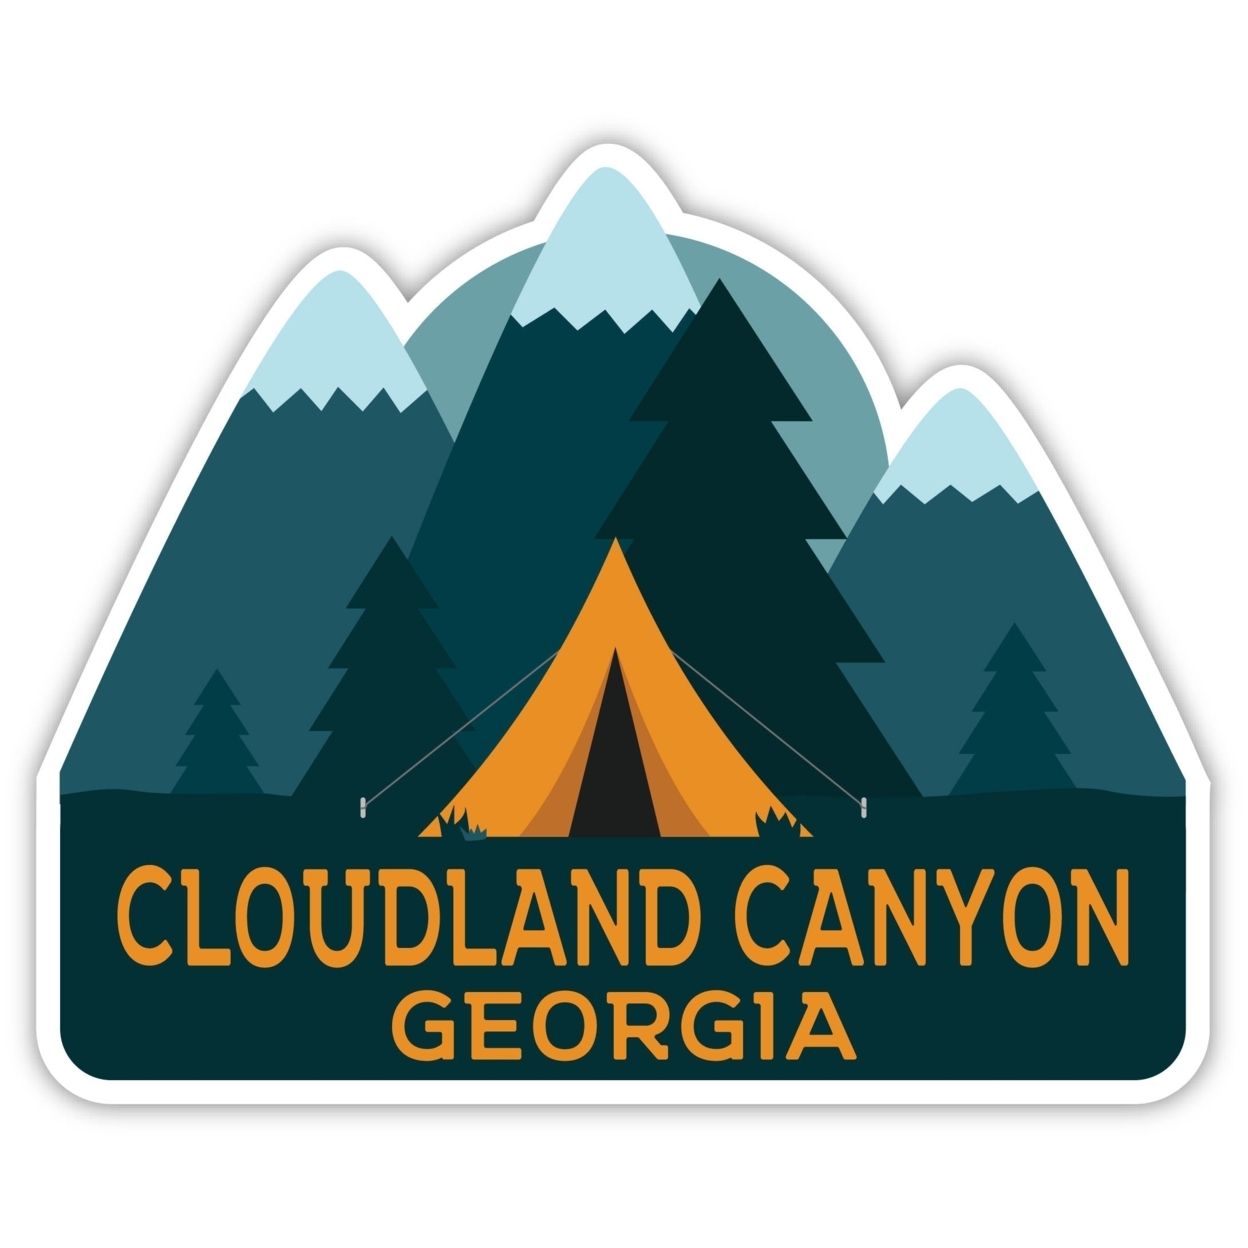 Cloudland Canyon Georgia Souvenir Decorative Stickers (Choose Theme And Size) - Single Unit, 8-Inch, Great Outdoors